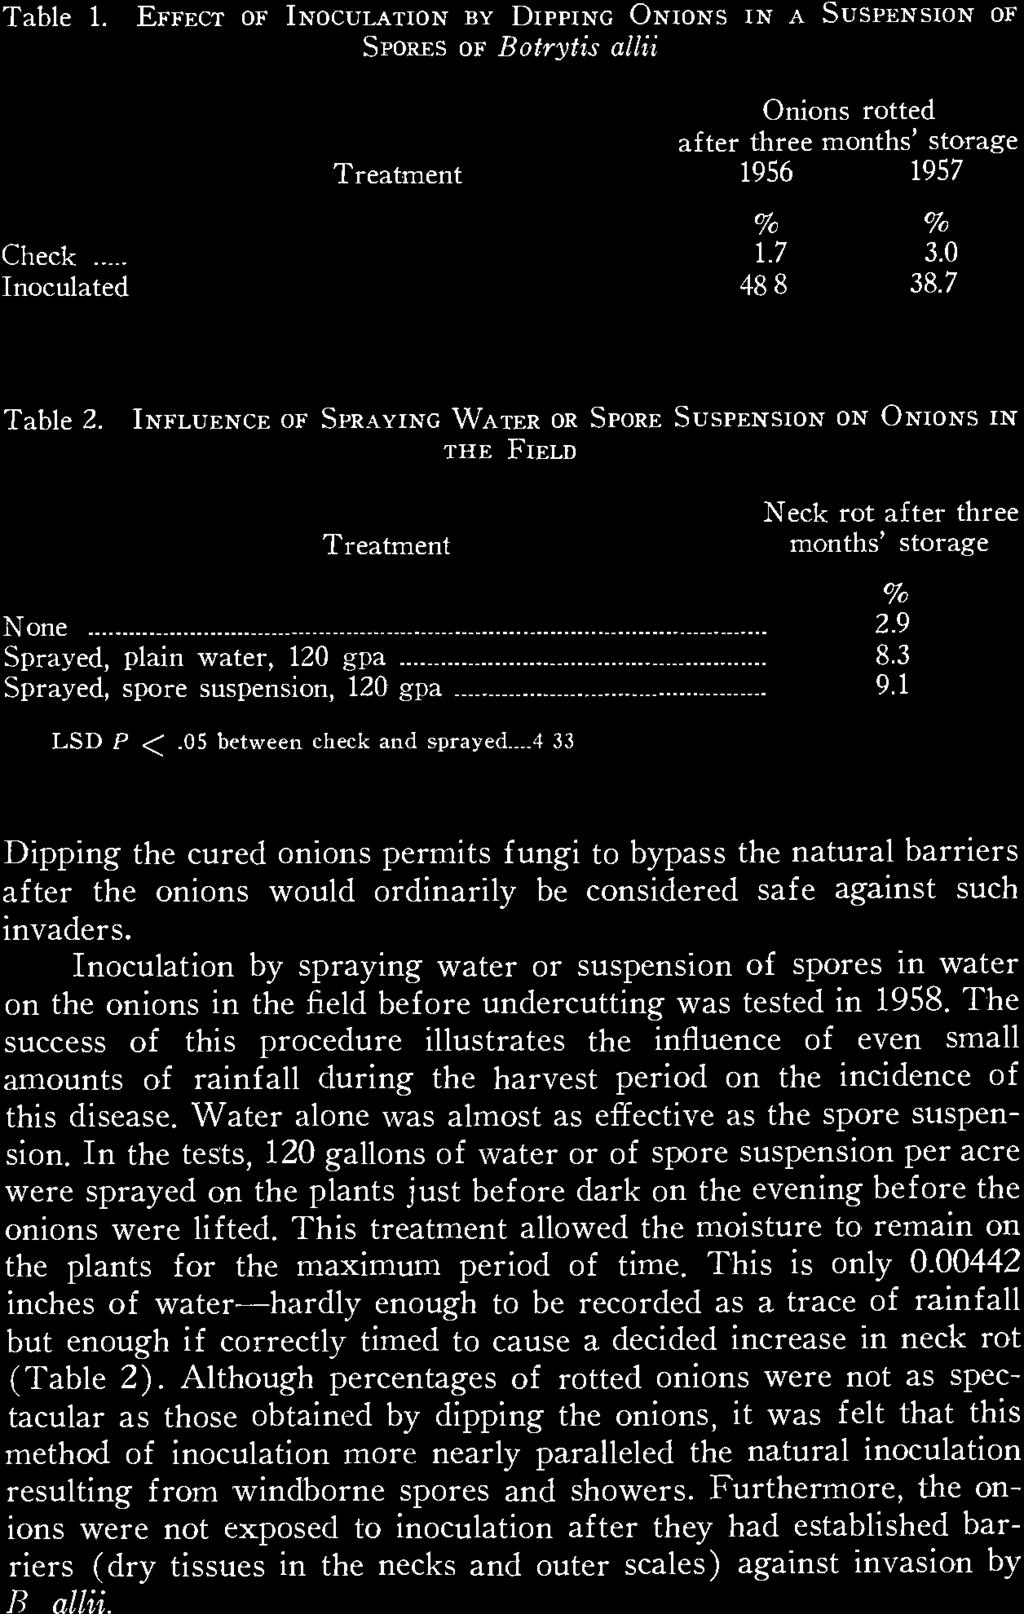 Table 1. EFFECT OF INOCULATION BY DIPPING ONIONS IN A SUSPENSION OF SPORES OF Botrytis allii Onions rotted after three months' storage Treatment 1956 1957 Check ----- 1.7 3.0 Inoculated 48 8 38.